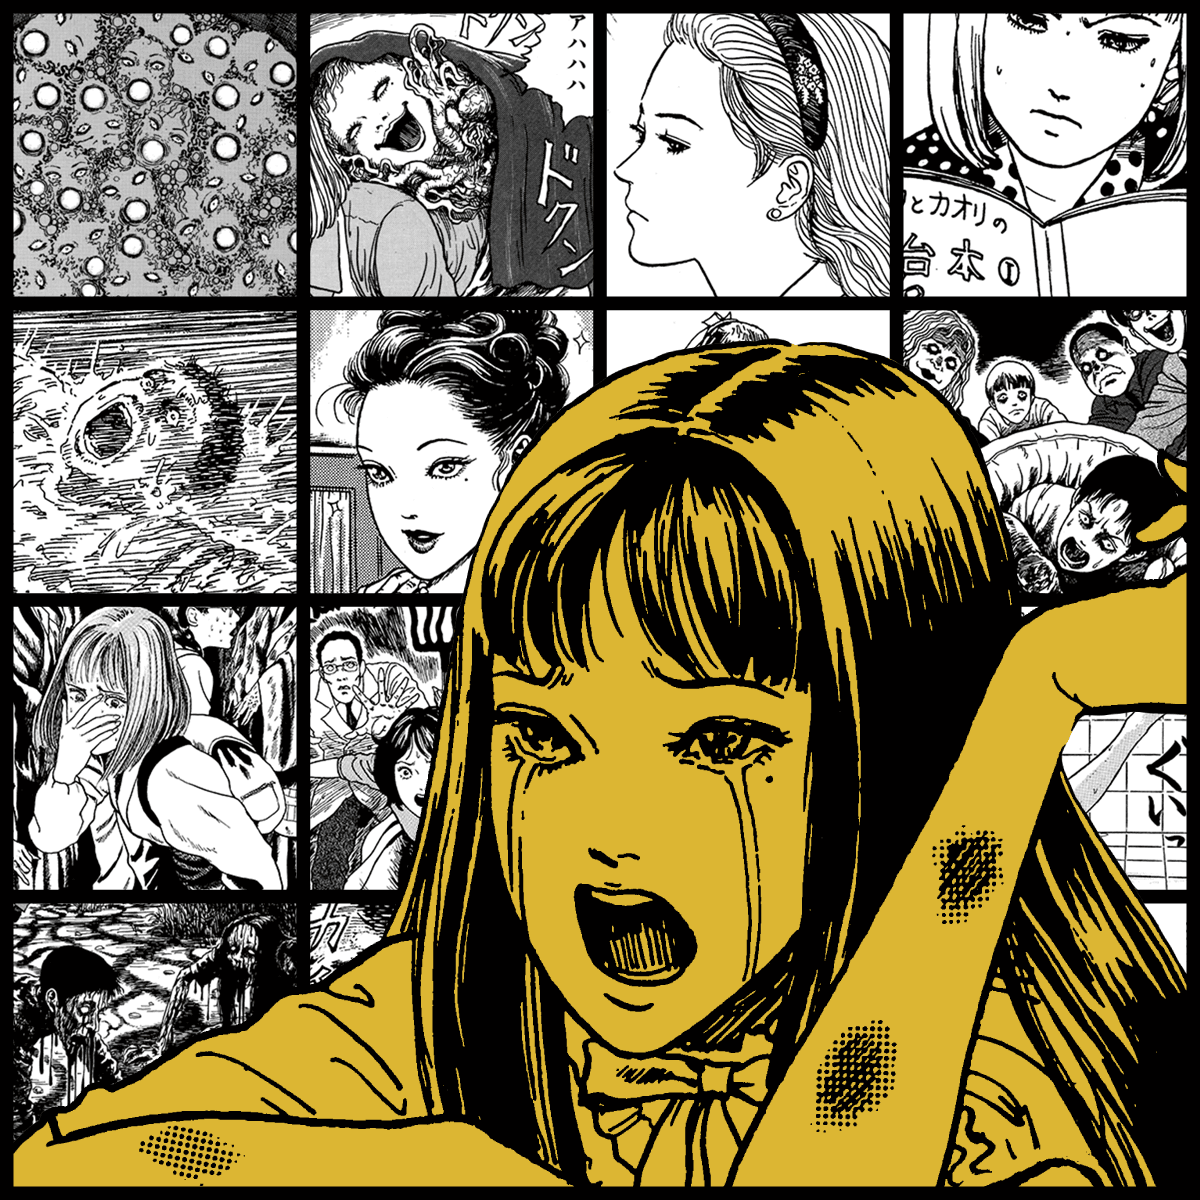 TOMIE by Junji Ito #532